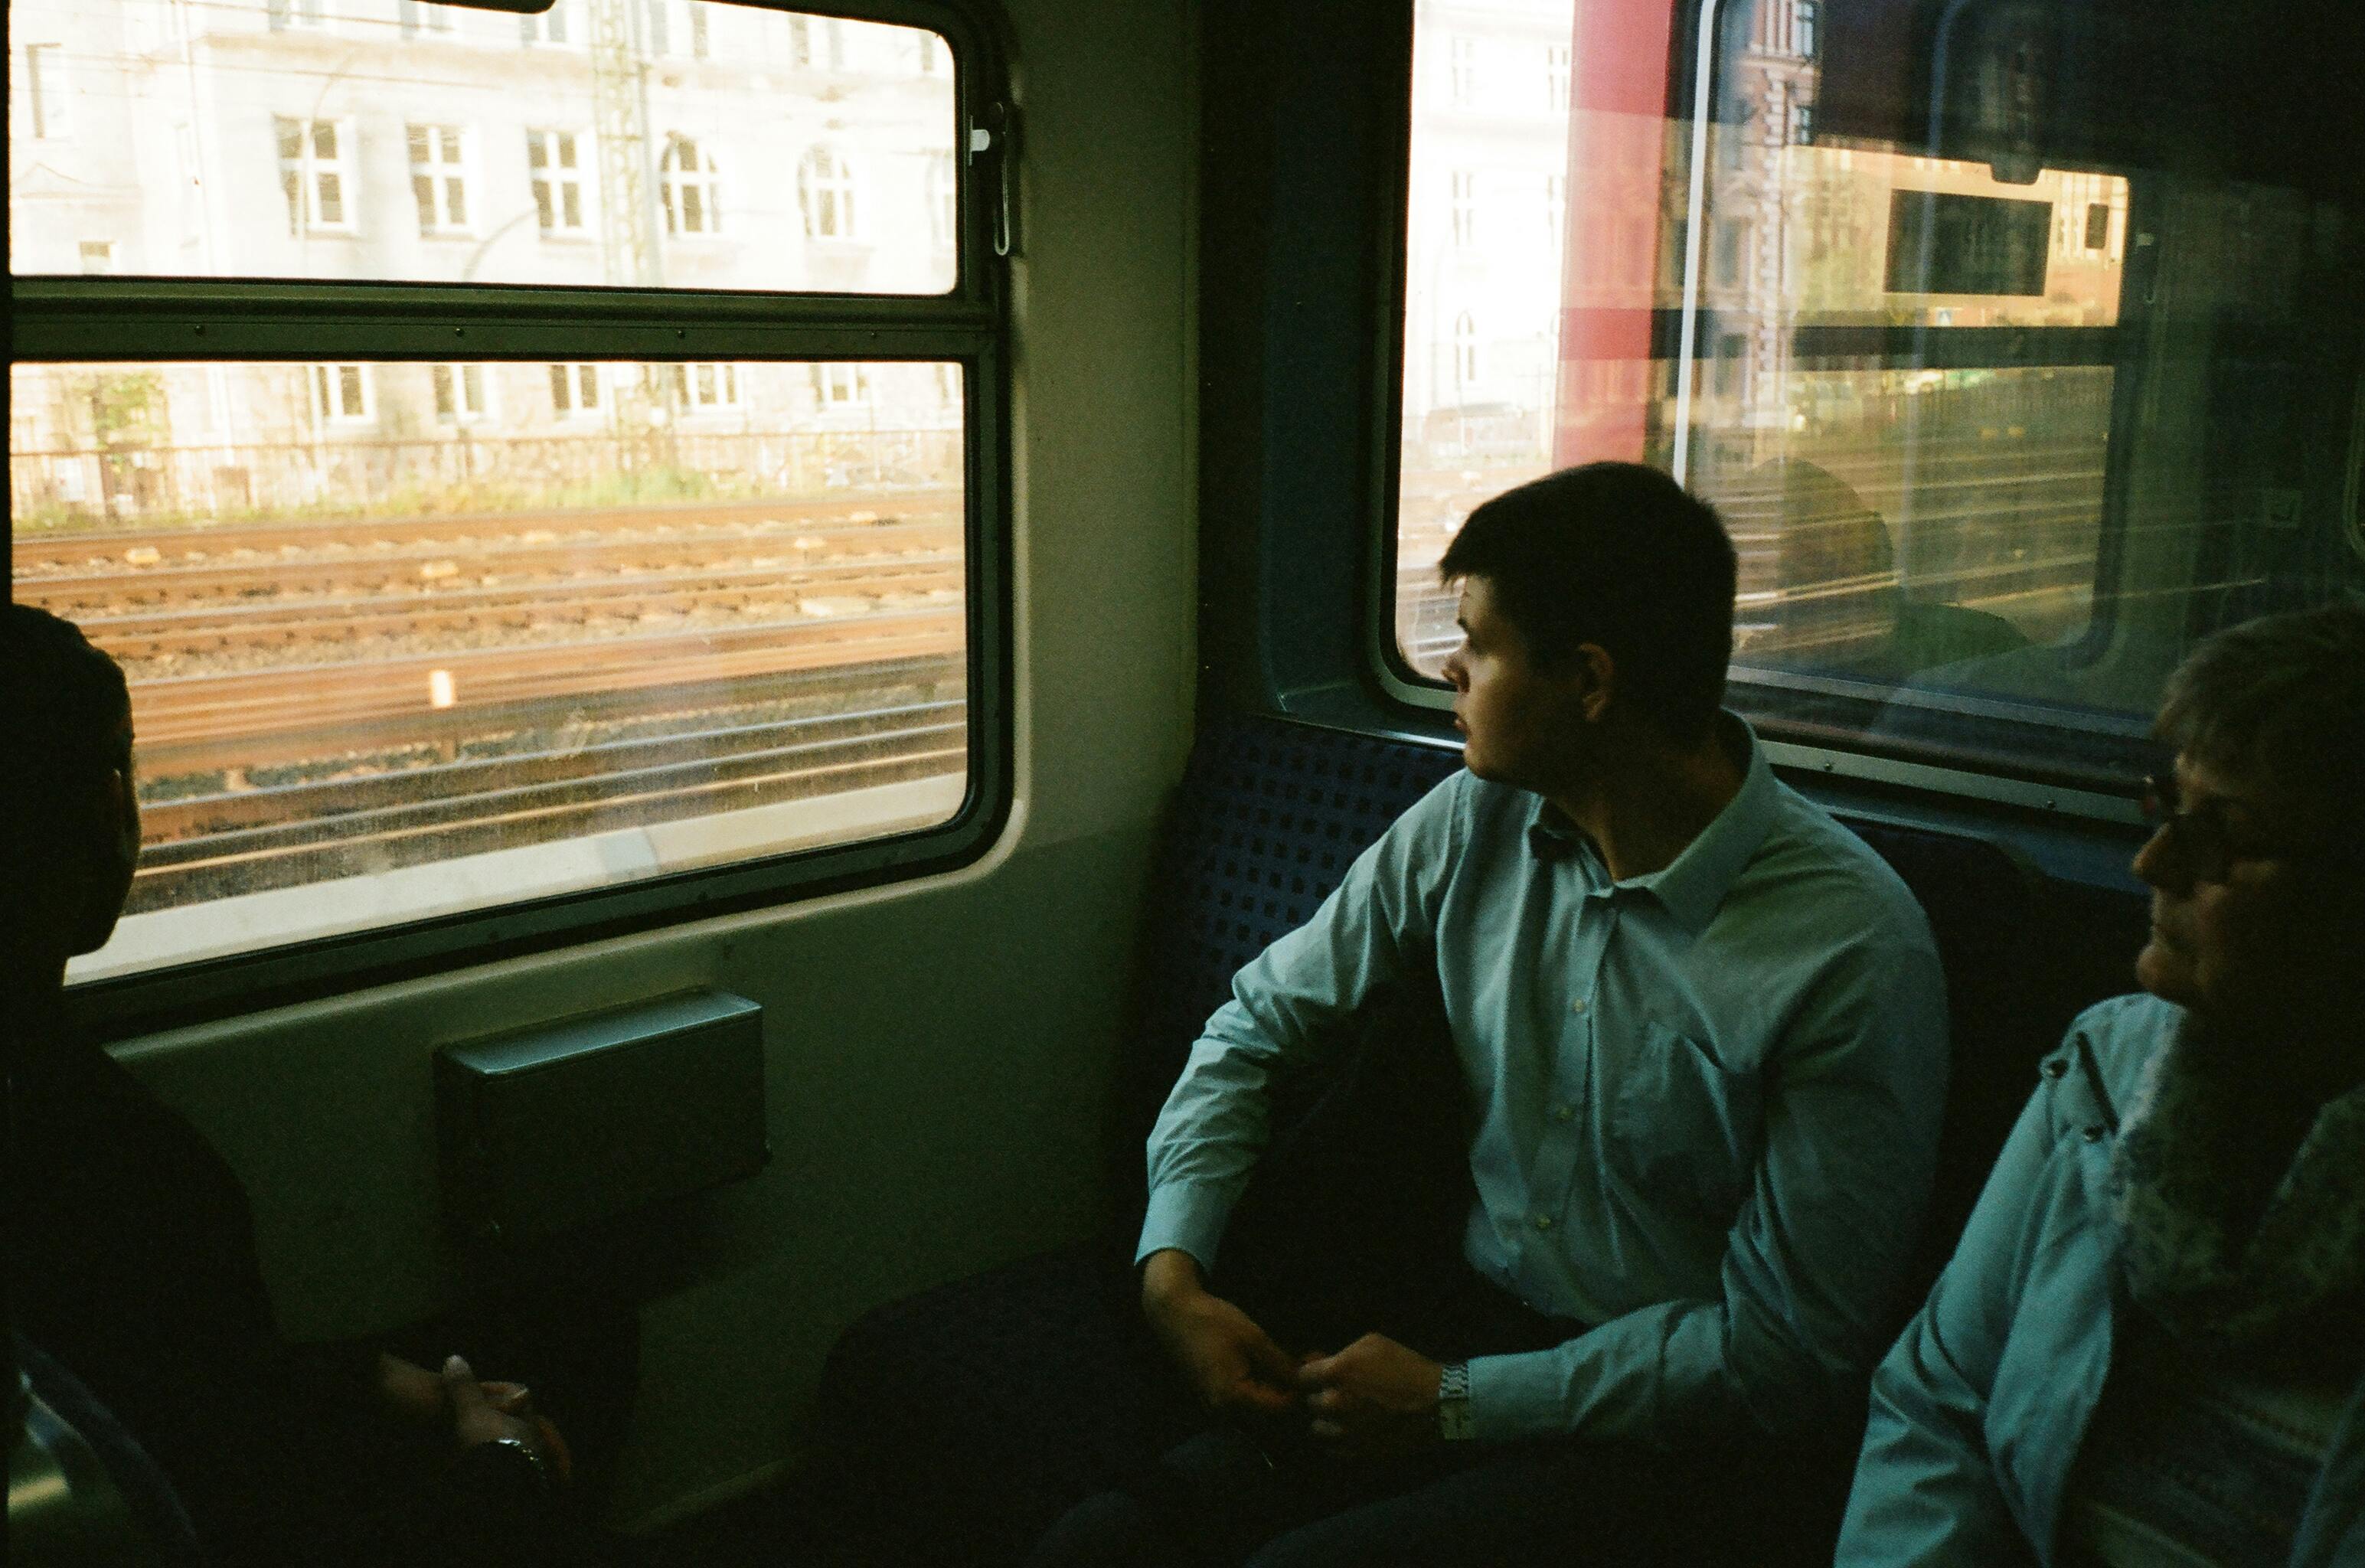 Two people sitting inside the train | Photo: Pexels